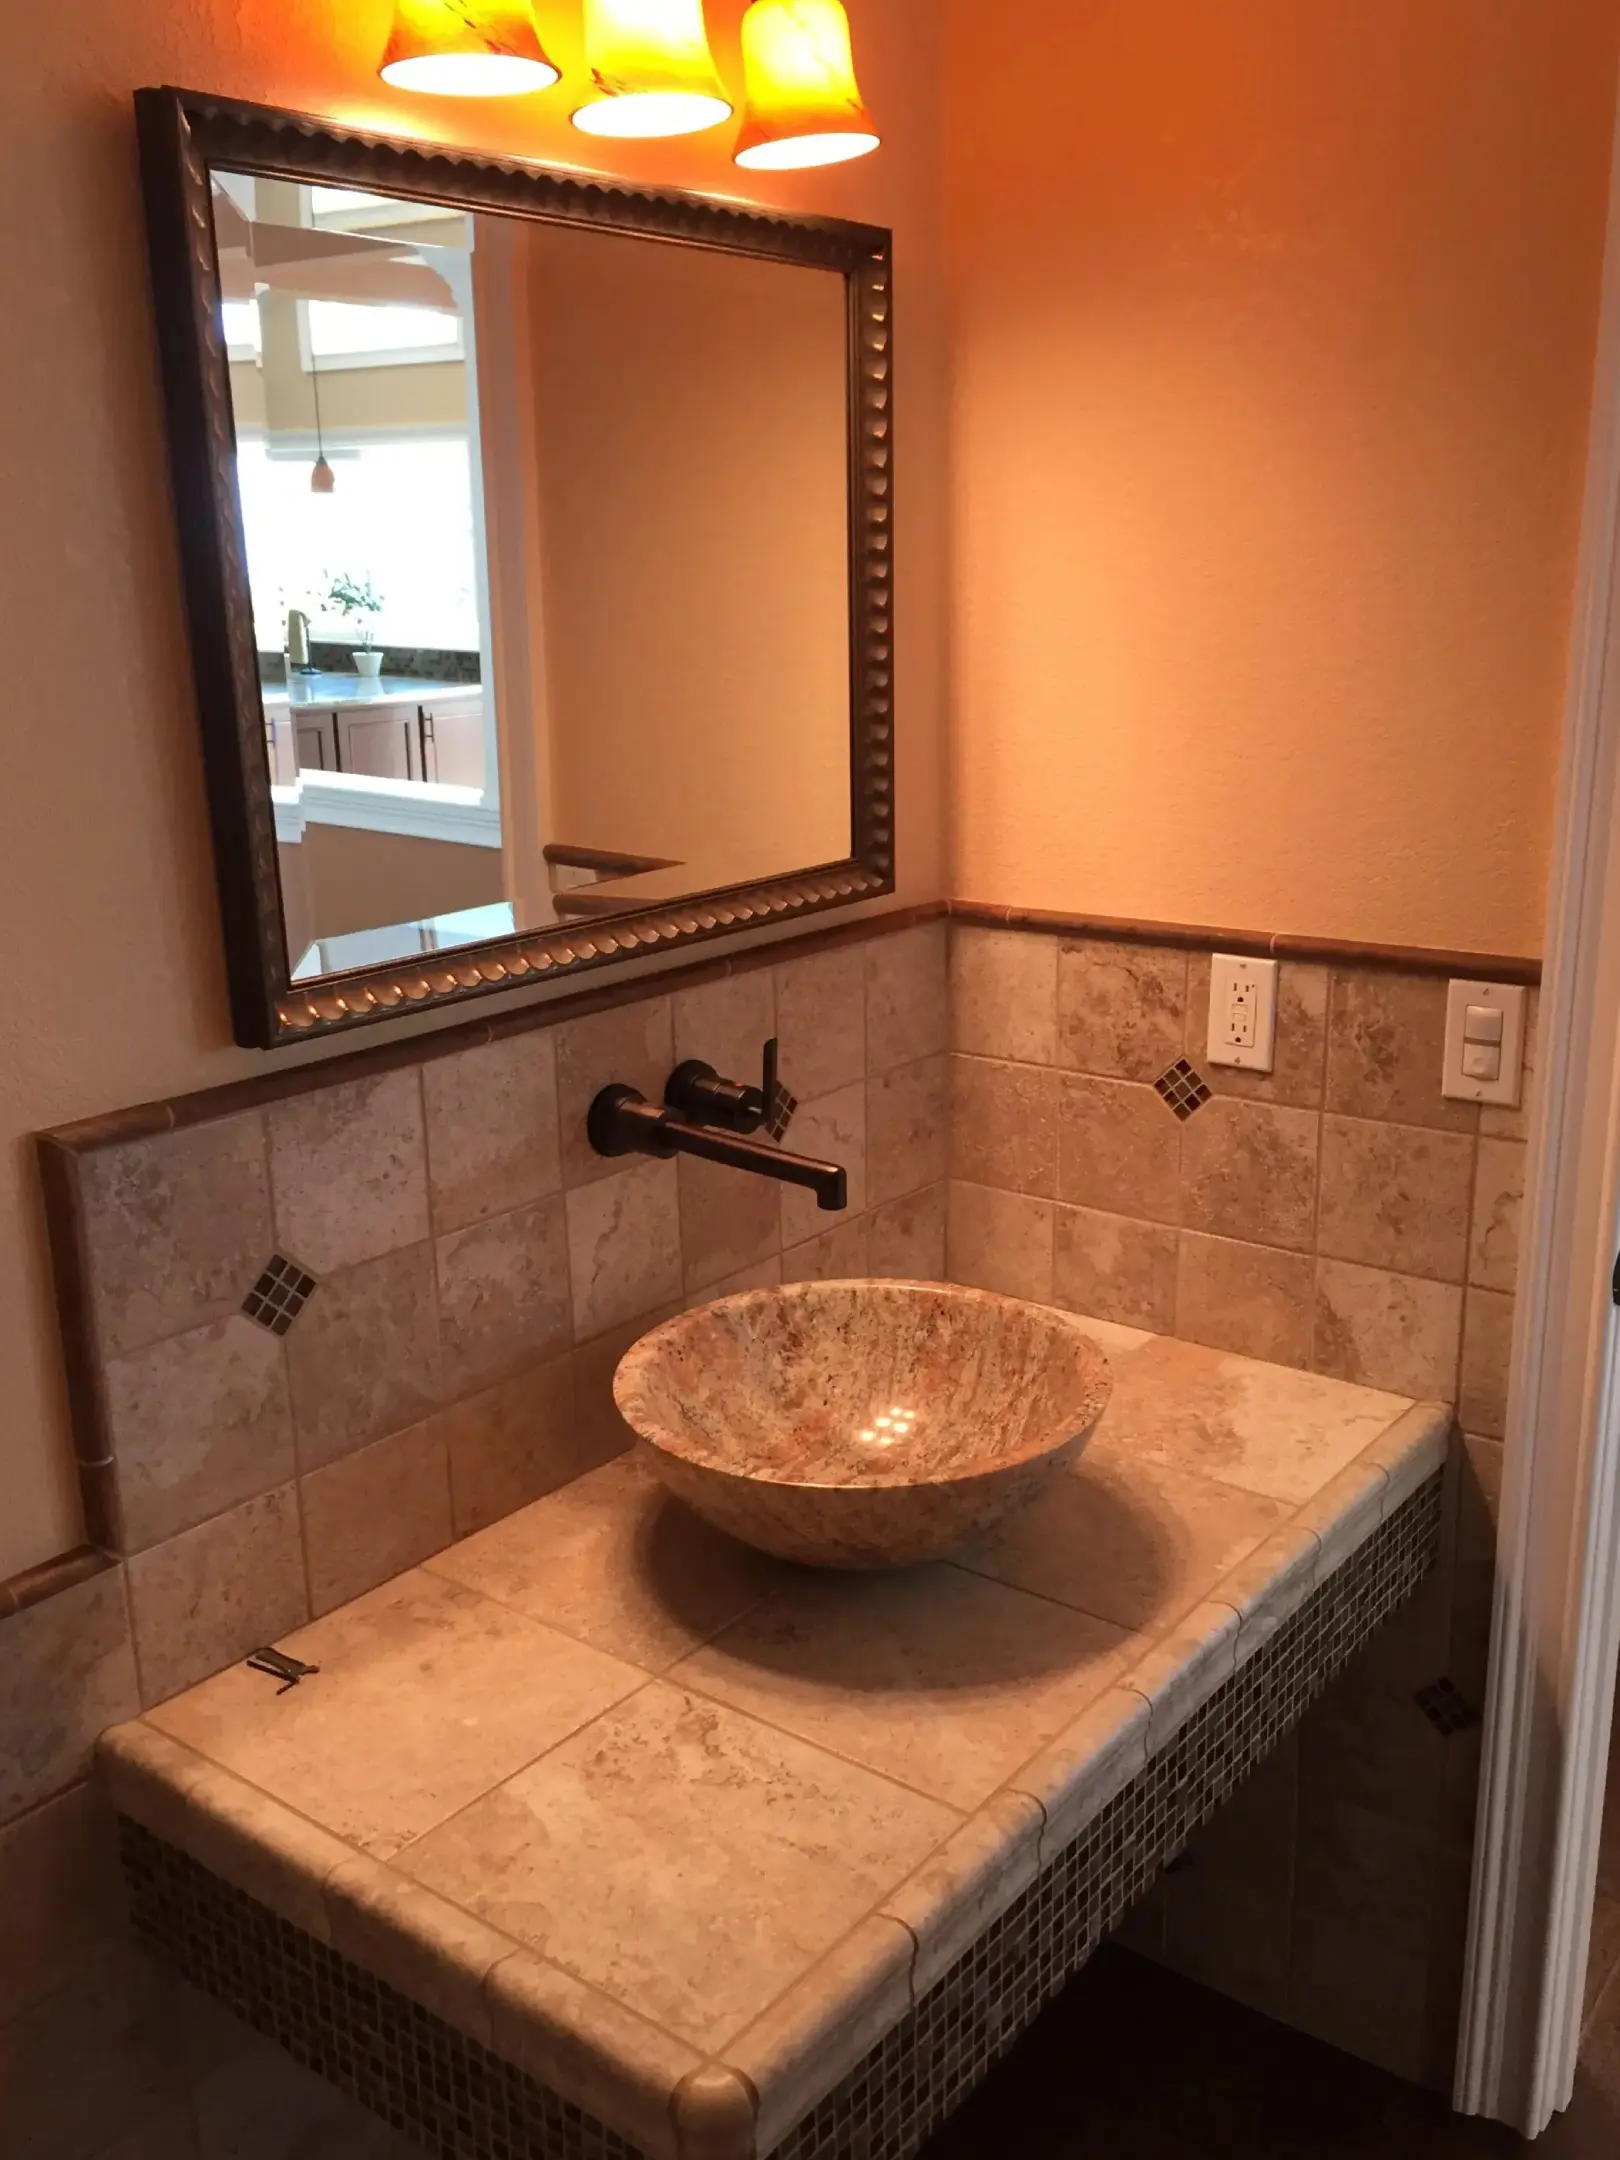 A bathroom with marble counter top and sink.